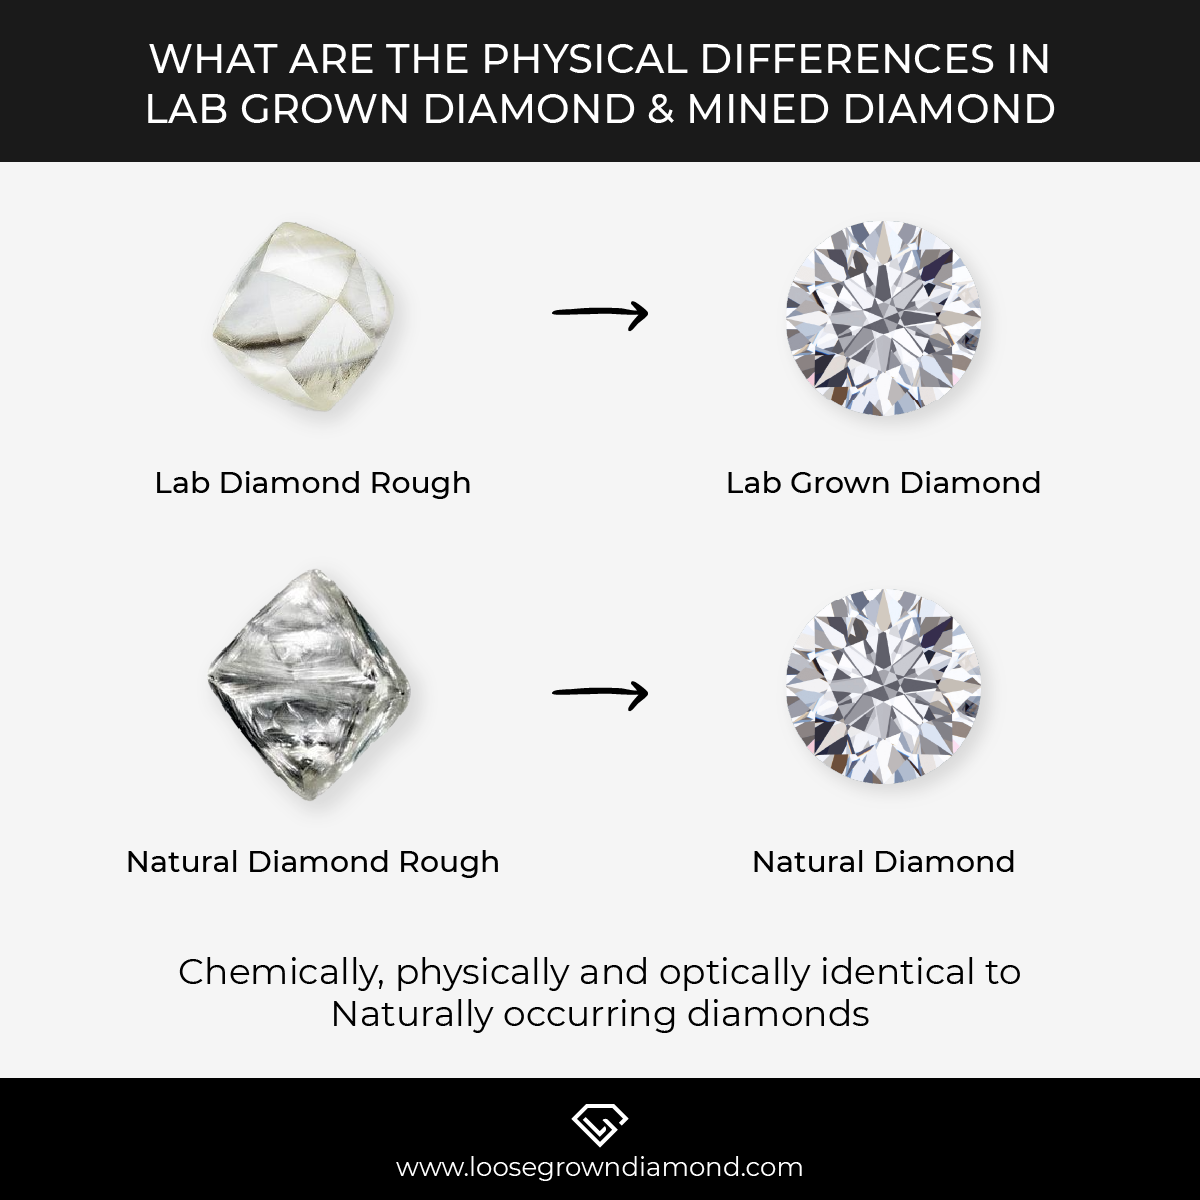 Physical Differences of Lab Grown Diamonds vs Mined Diamonds